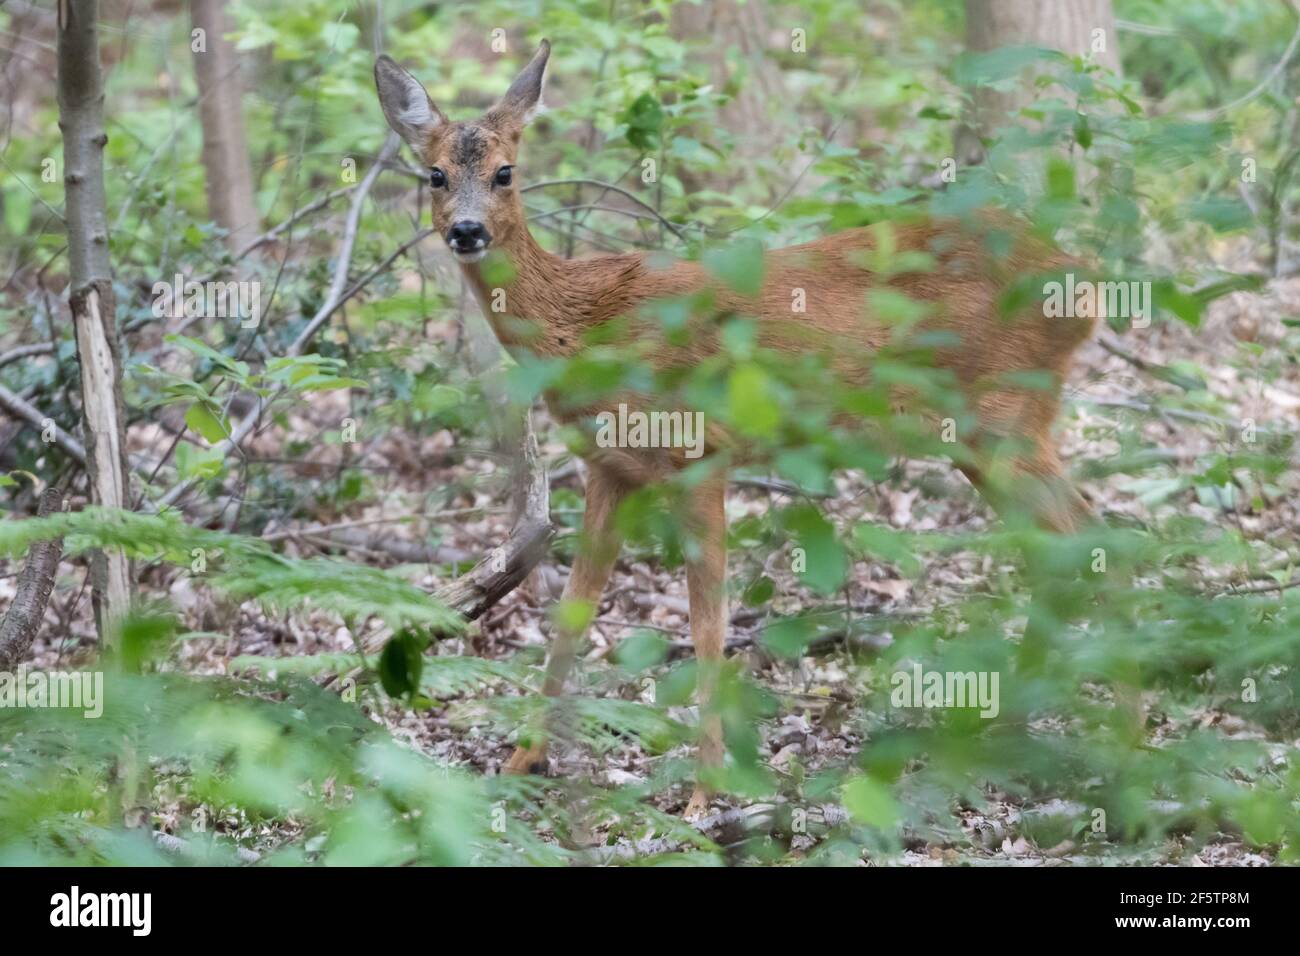 Roe deer hiding in the forest among the leaves, photographed in the Netherlands. Stock Photo